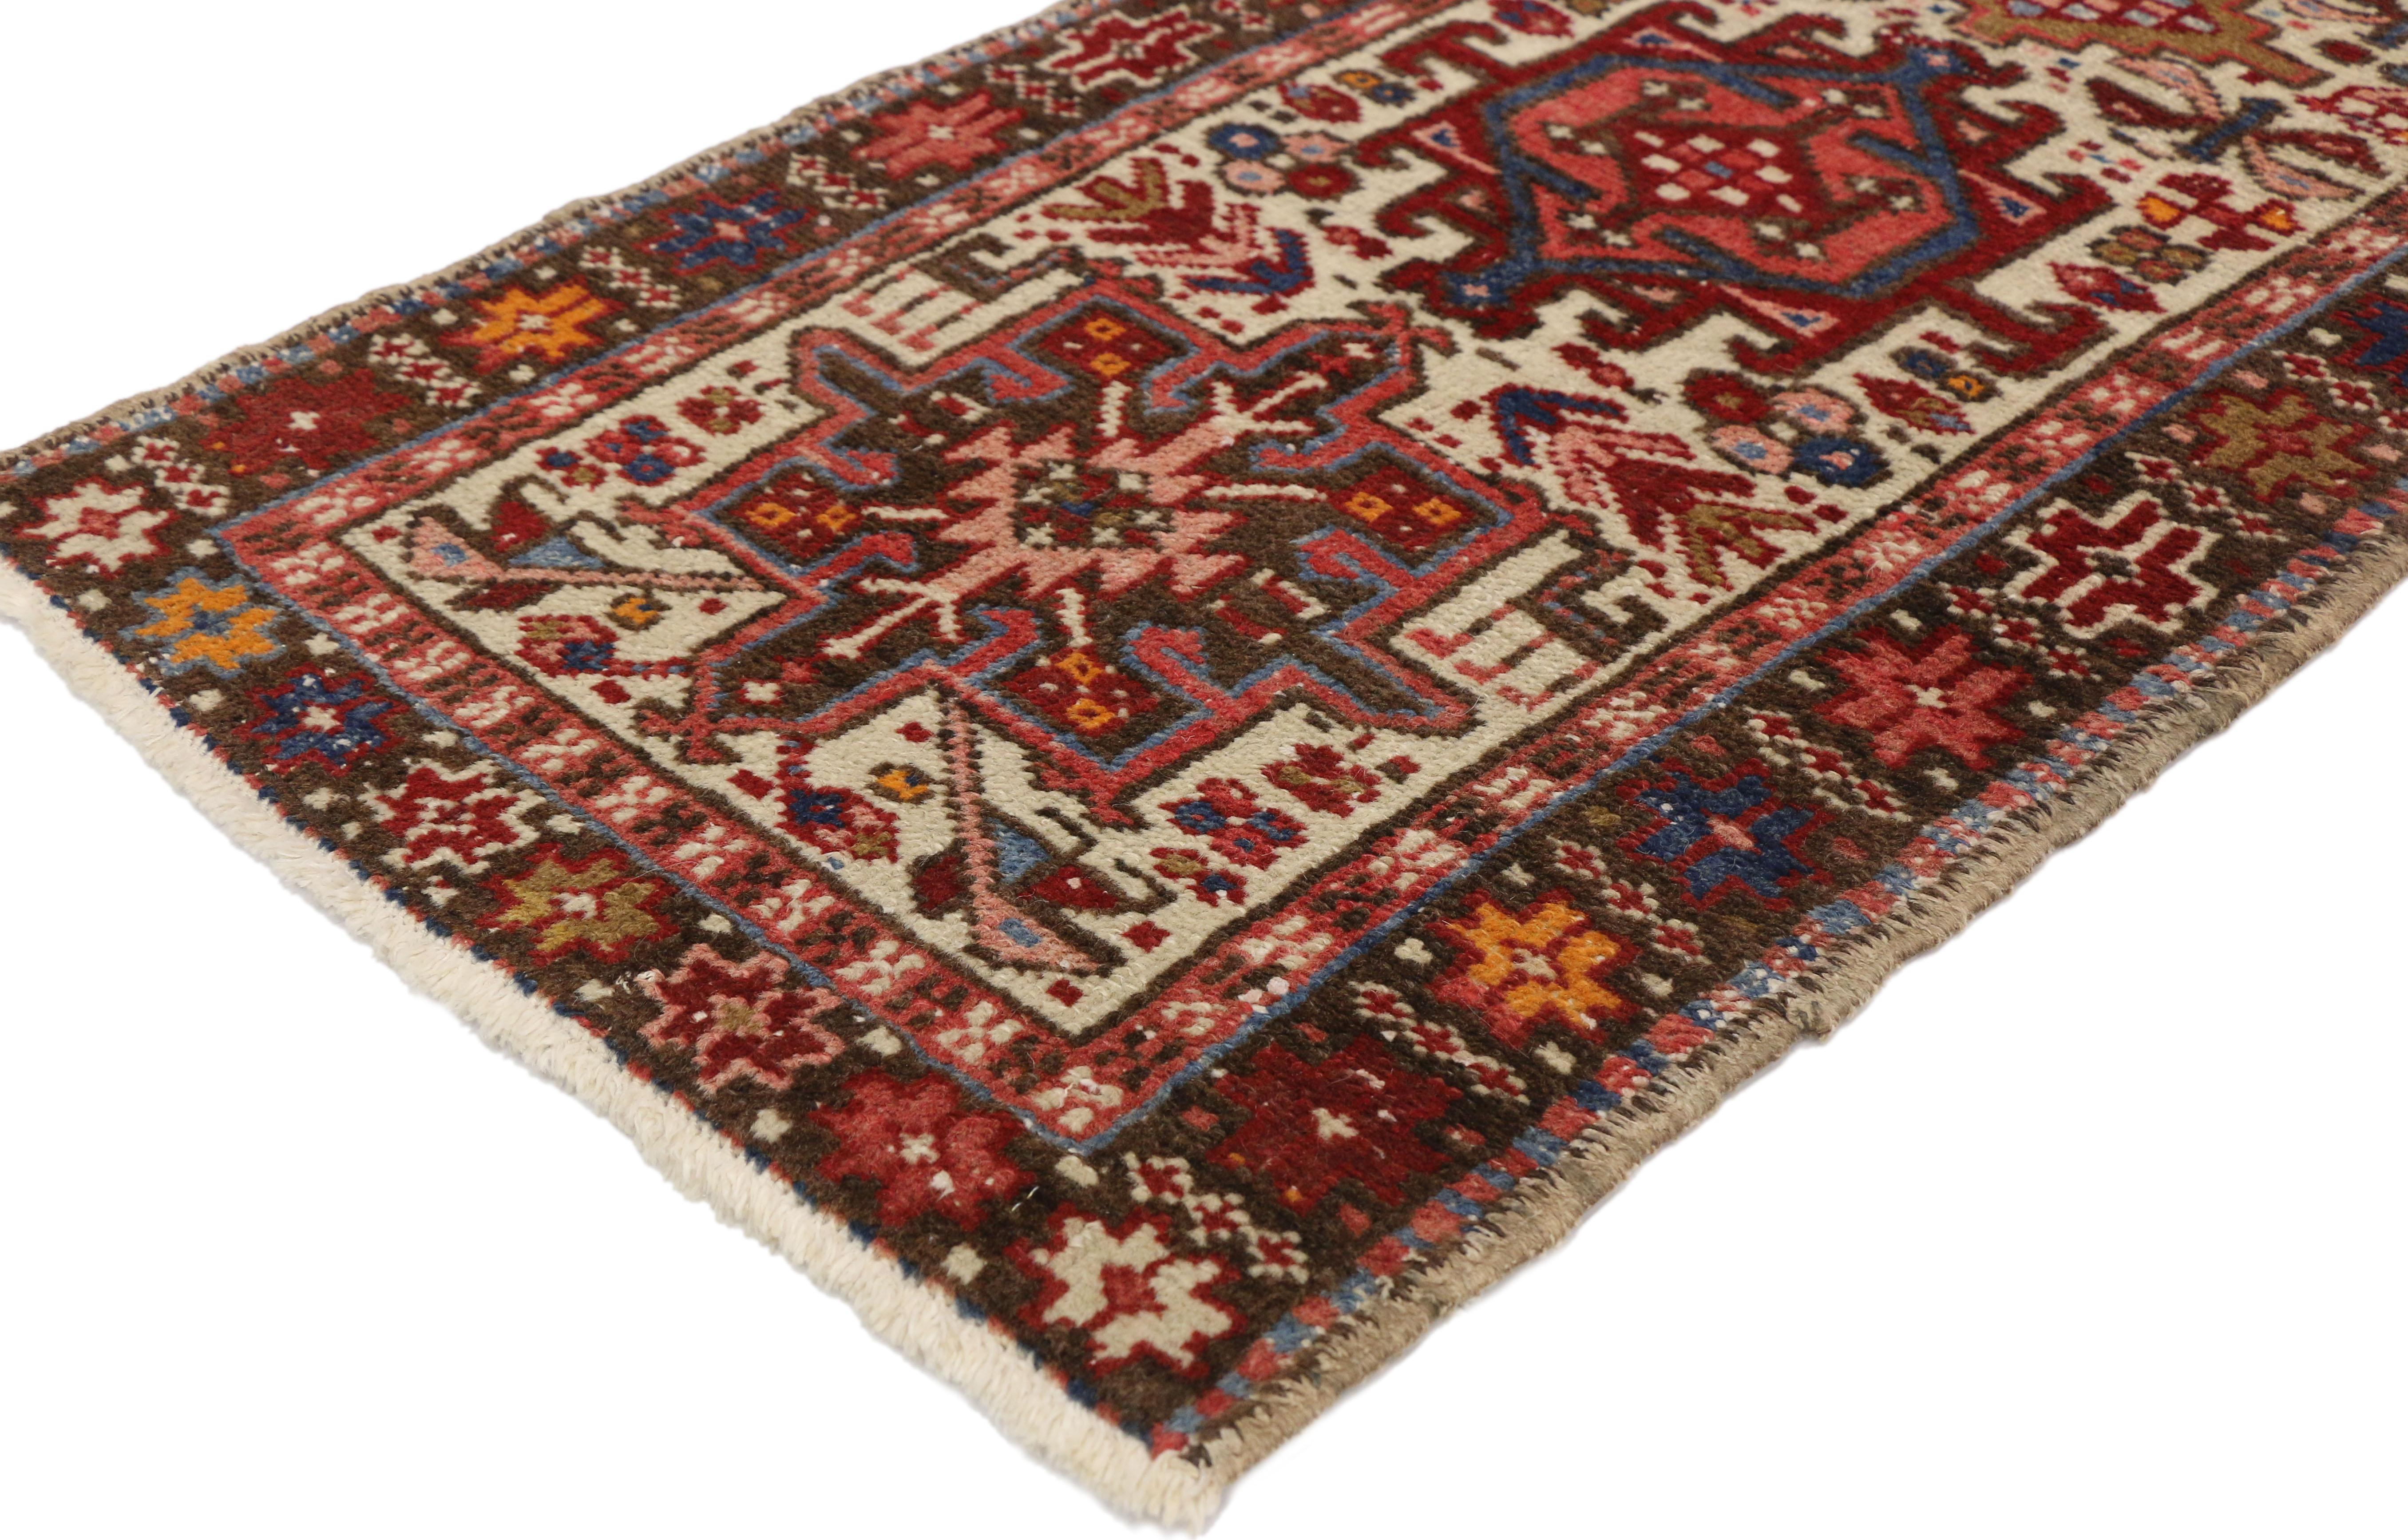 76897 Vintage Persian Karaja Heriz Rug with Modern Tribal Style 02'00 x 05'01. Full of tiny details and a bold expressive design combined with lively colors and tribal style, this hand-knotted wool vintage Persian Karaja Heriz rug is a captivating